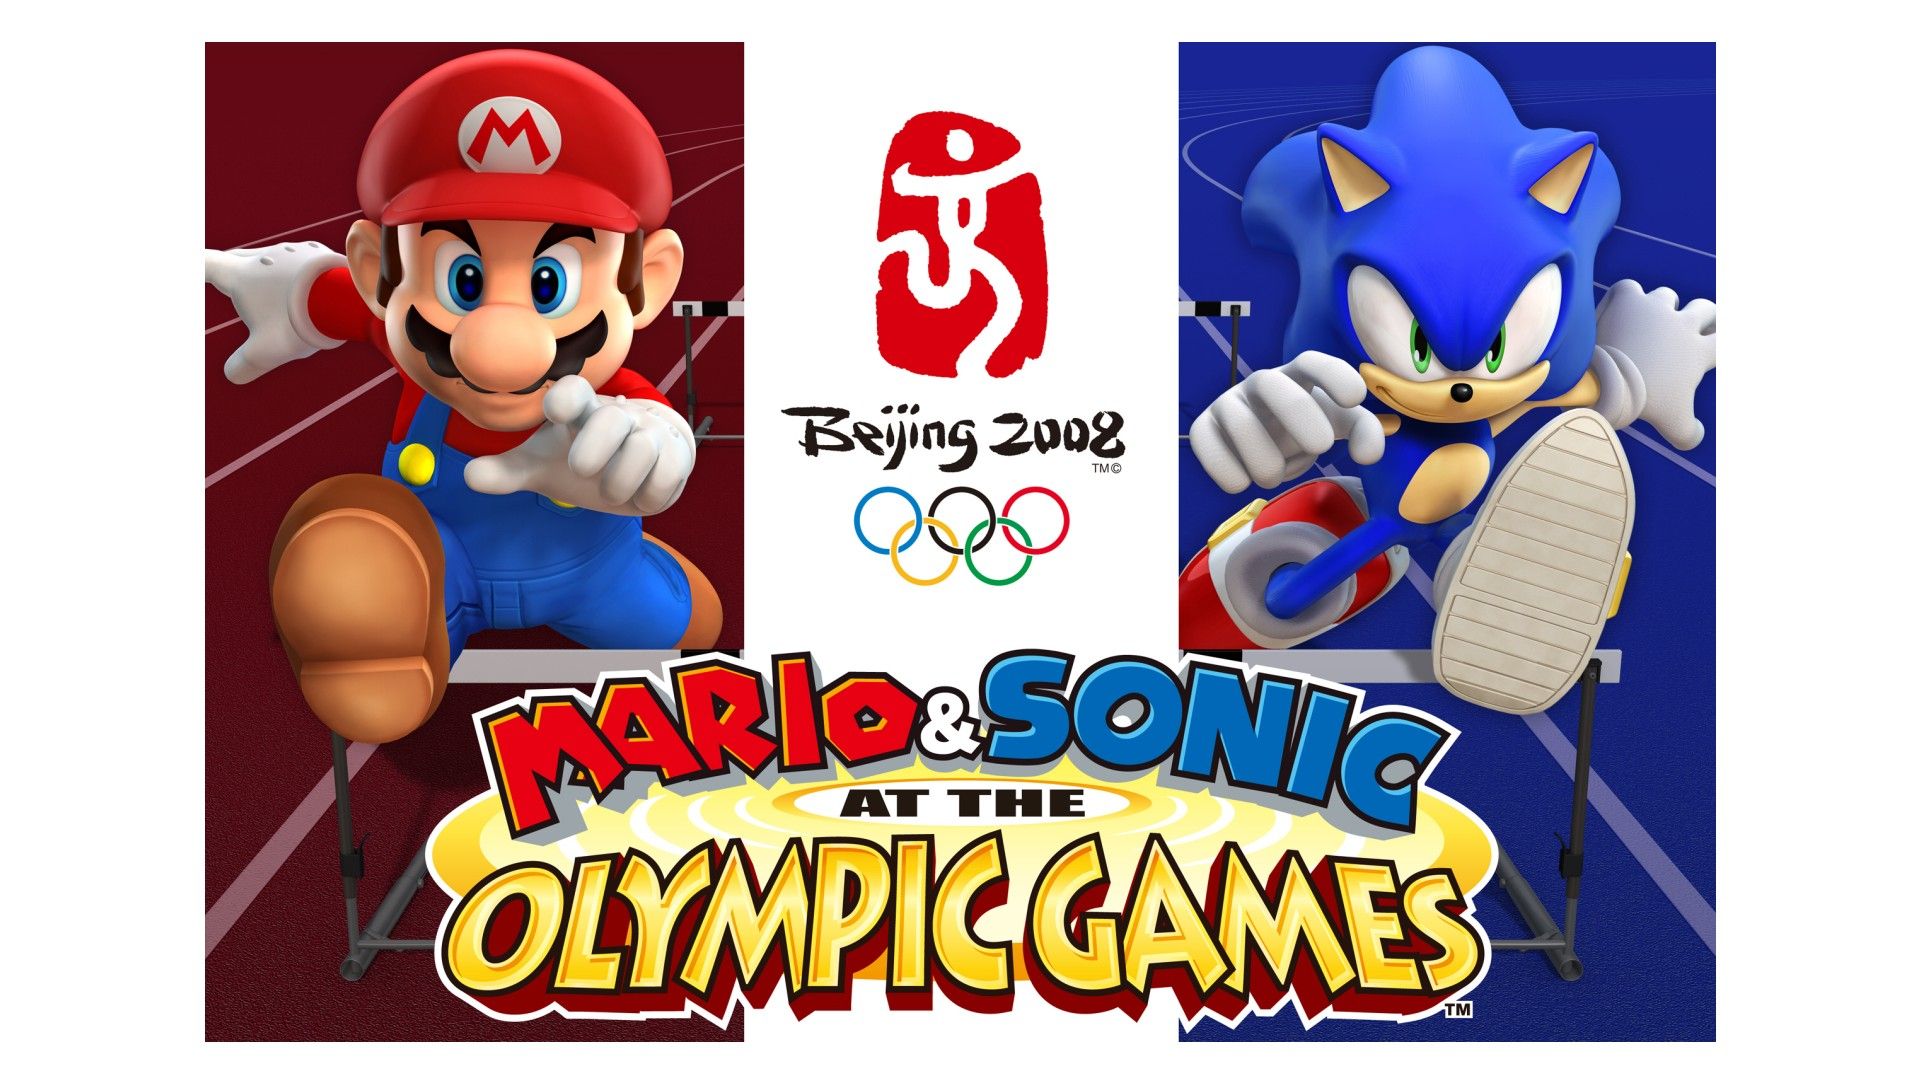 Mario & Sonic at the Olympic Games HD Wallpaper. Background Image